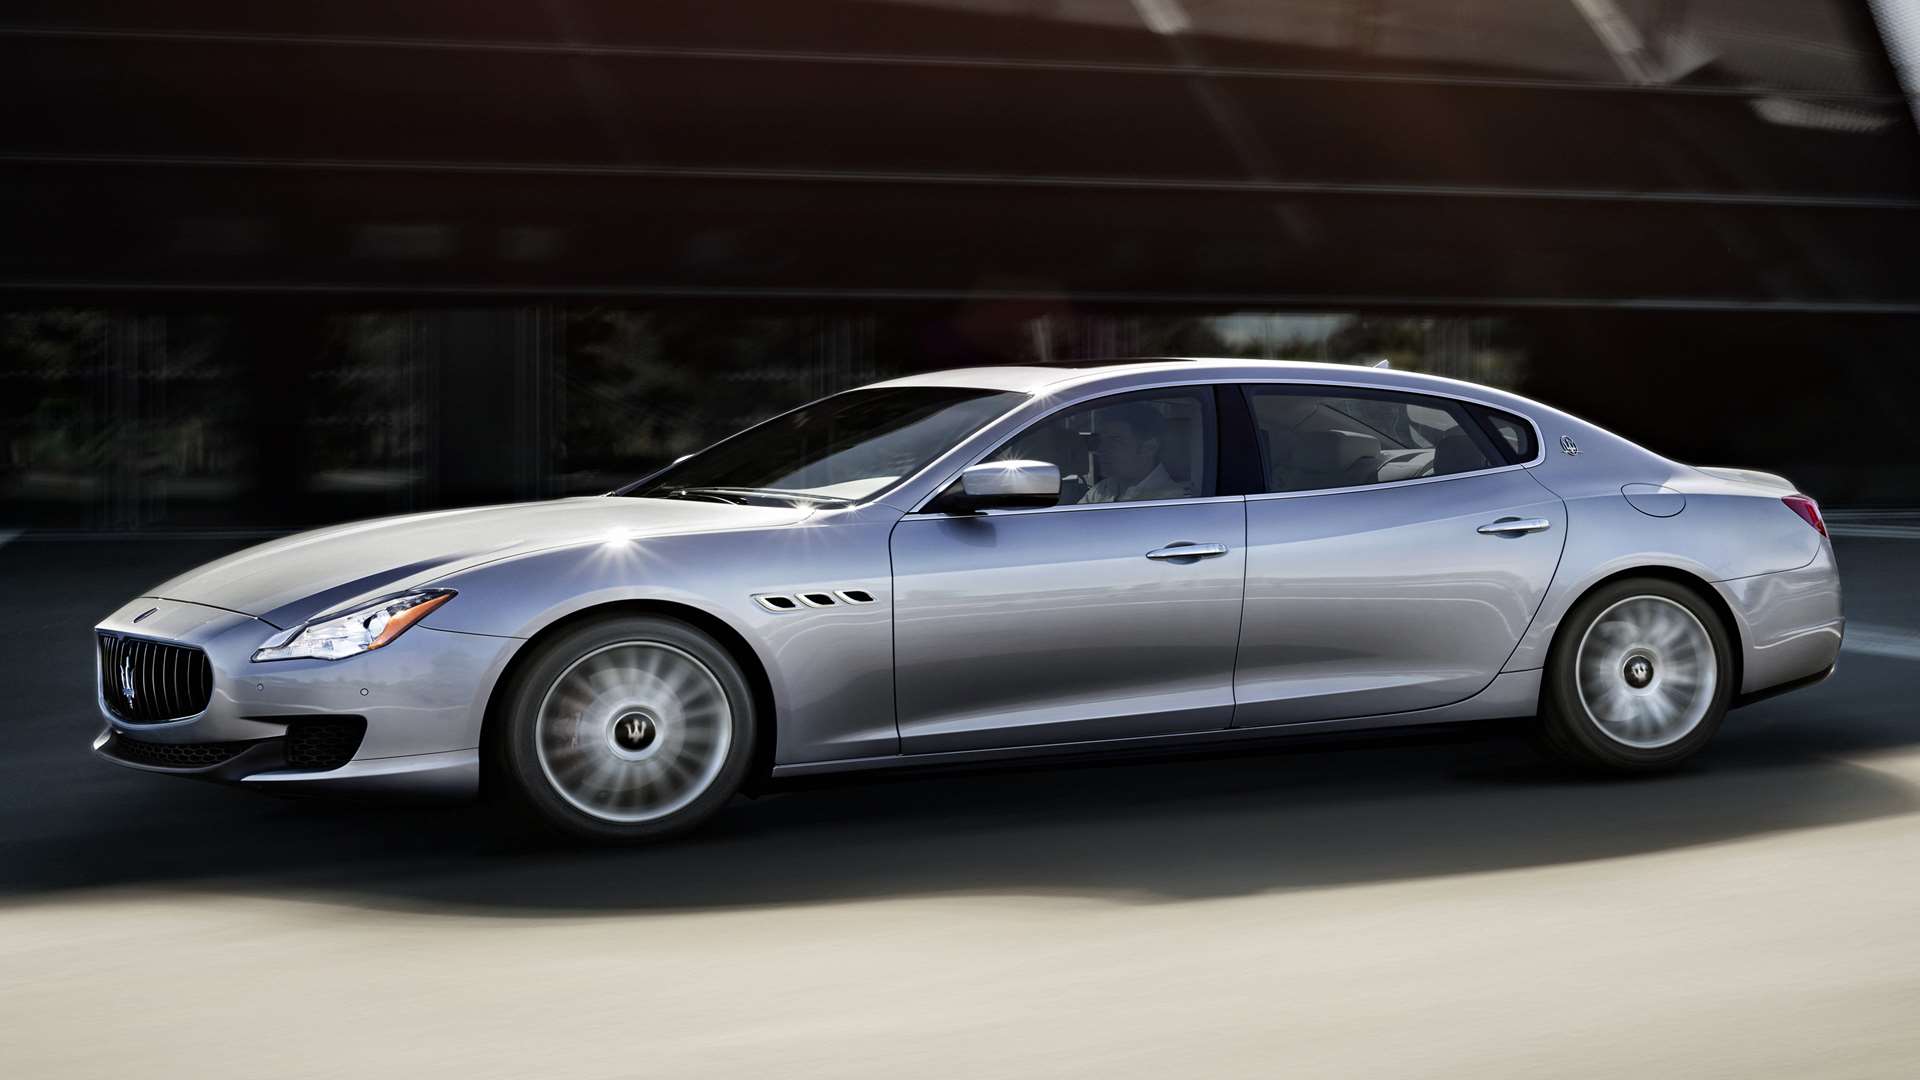 Swooping bodywork gives the Quattroporte a purposeful stance